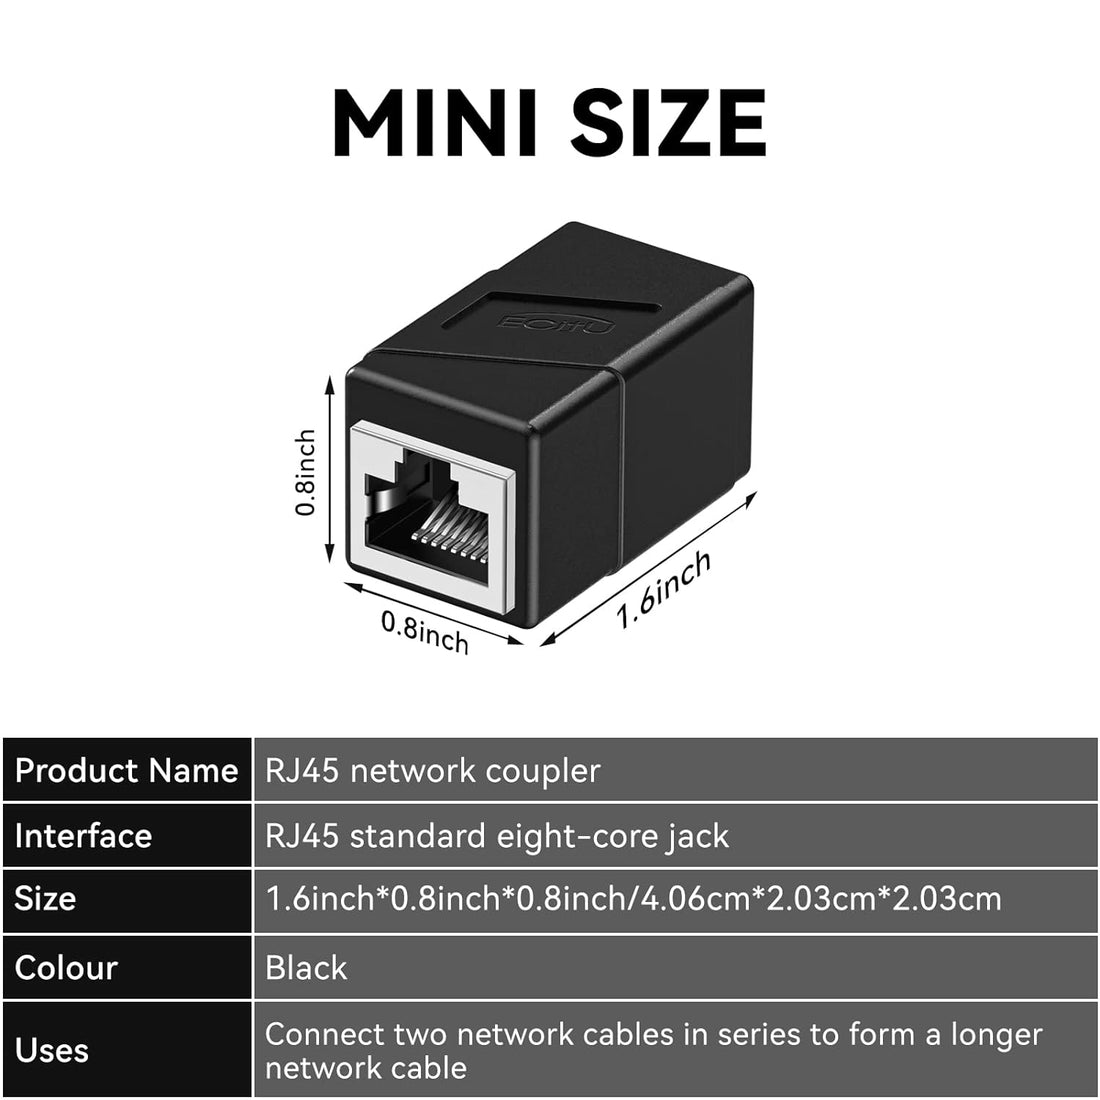 RJ45 Coupler,5 Pack Ethernet Adapters Female to Female, Network Connectors for Cat8/Cat7/Cat6/Cat5e/Cat5 Ethernet Cable